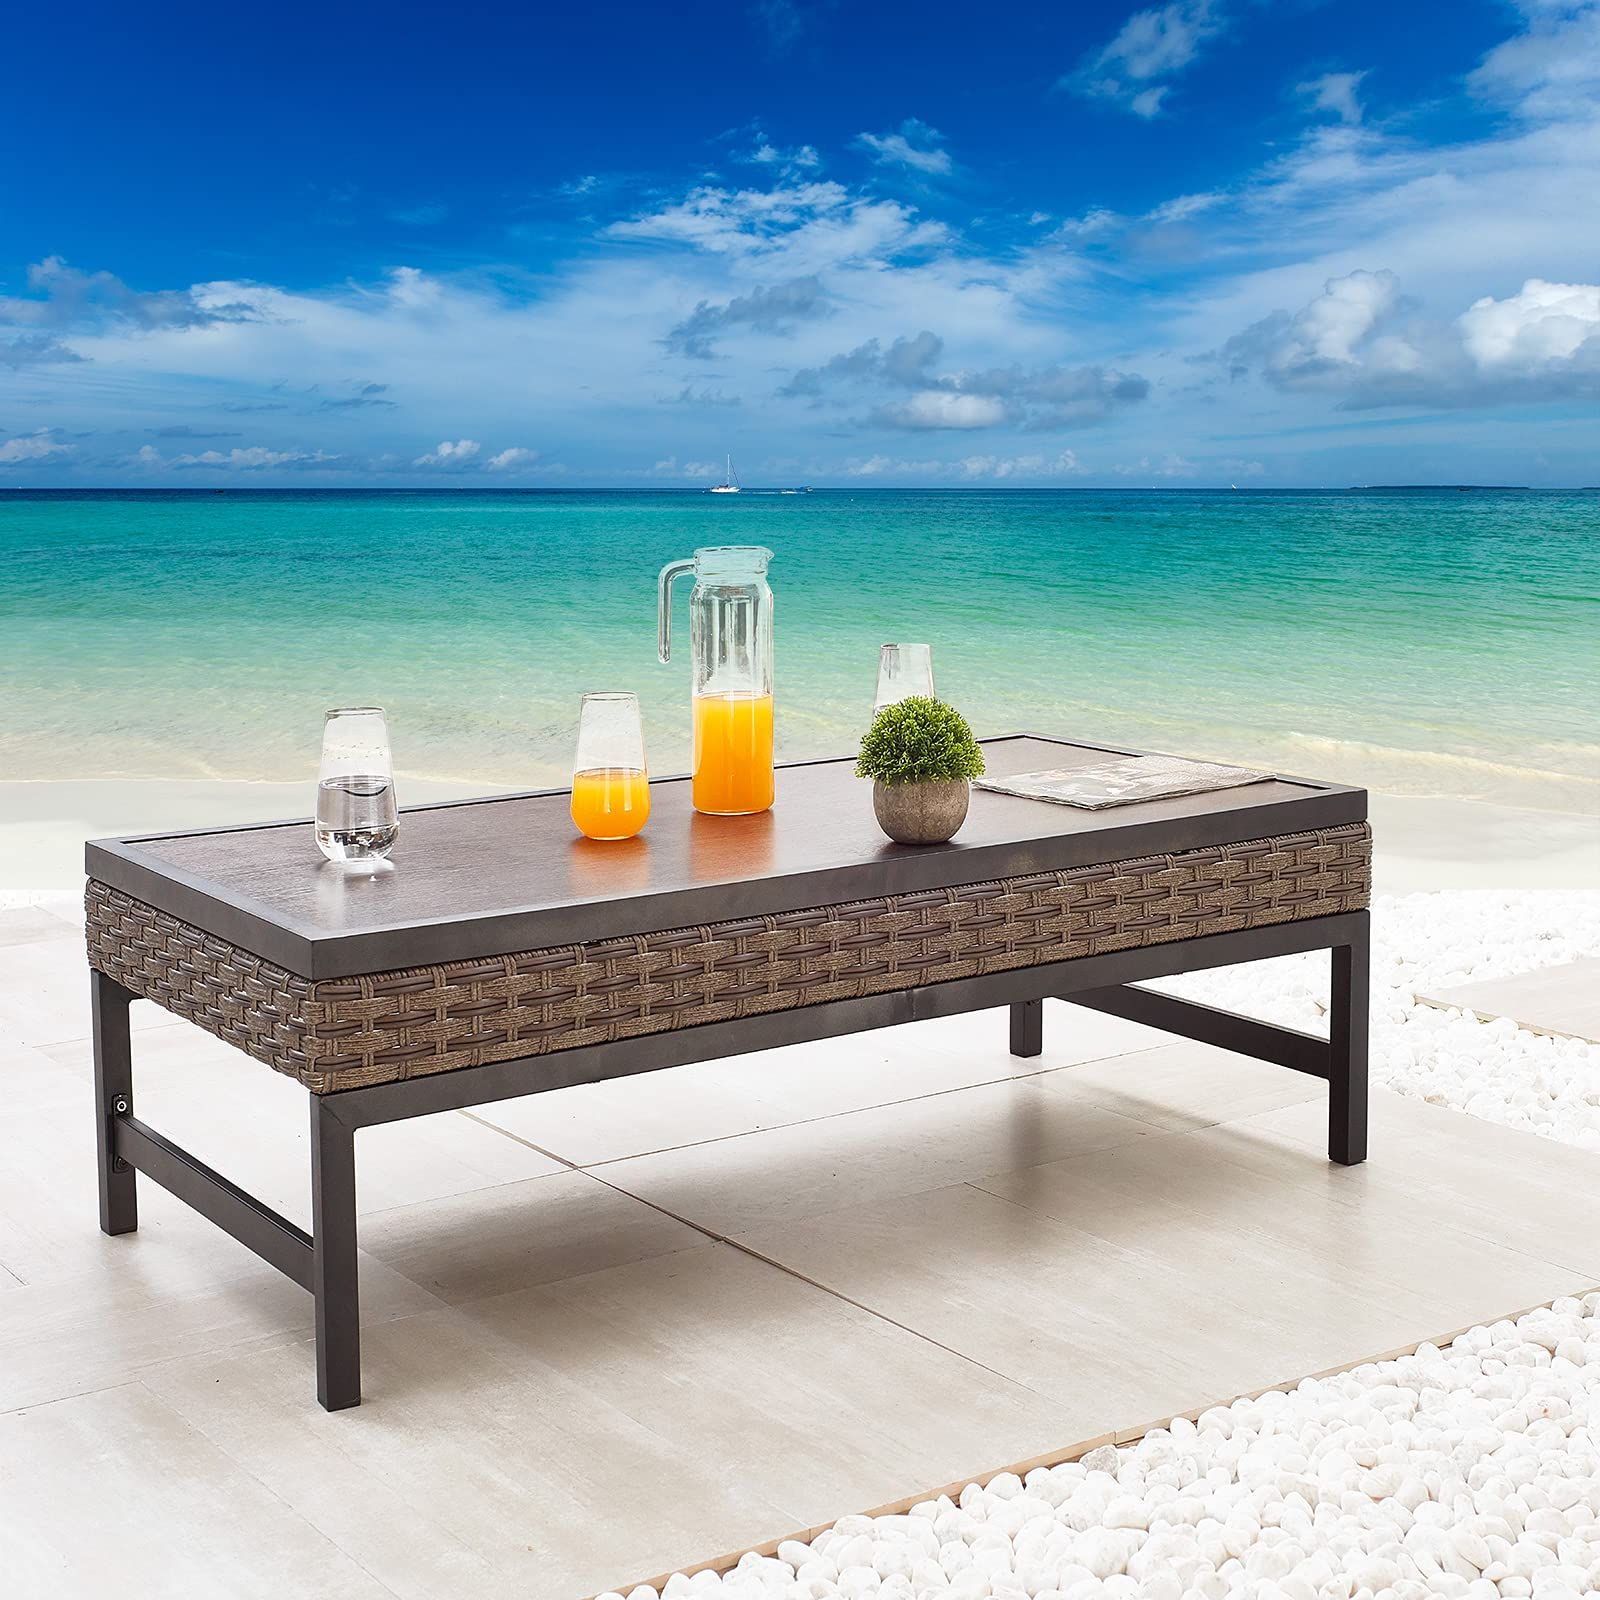 Current Natural Outdoor Cocktail Tables For Amazon: Sports Festival Patio Coffee Side Table Outdoor Furniture With  Wood Grain Tabletop, All Weather Wicker Rattan And Metal Frame For Deck  Porch Poolside Garden : Patio, Lawn & Garden (View 8 of 10)